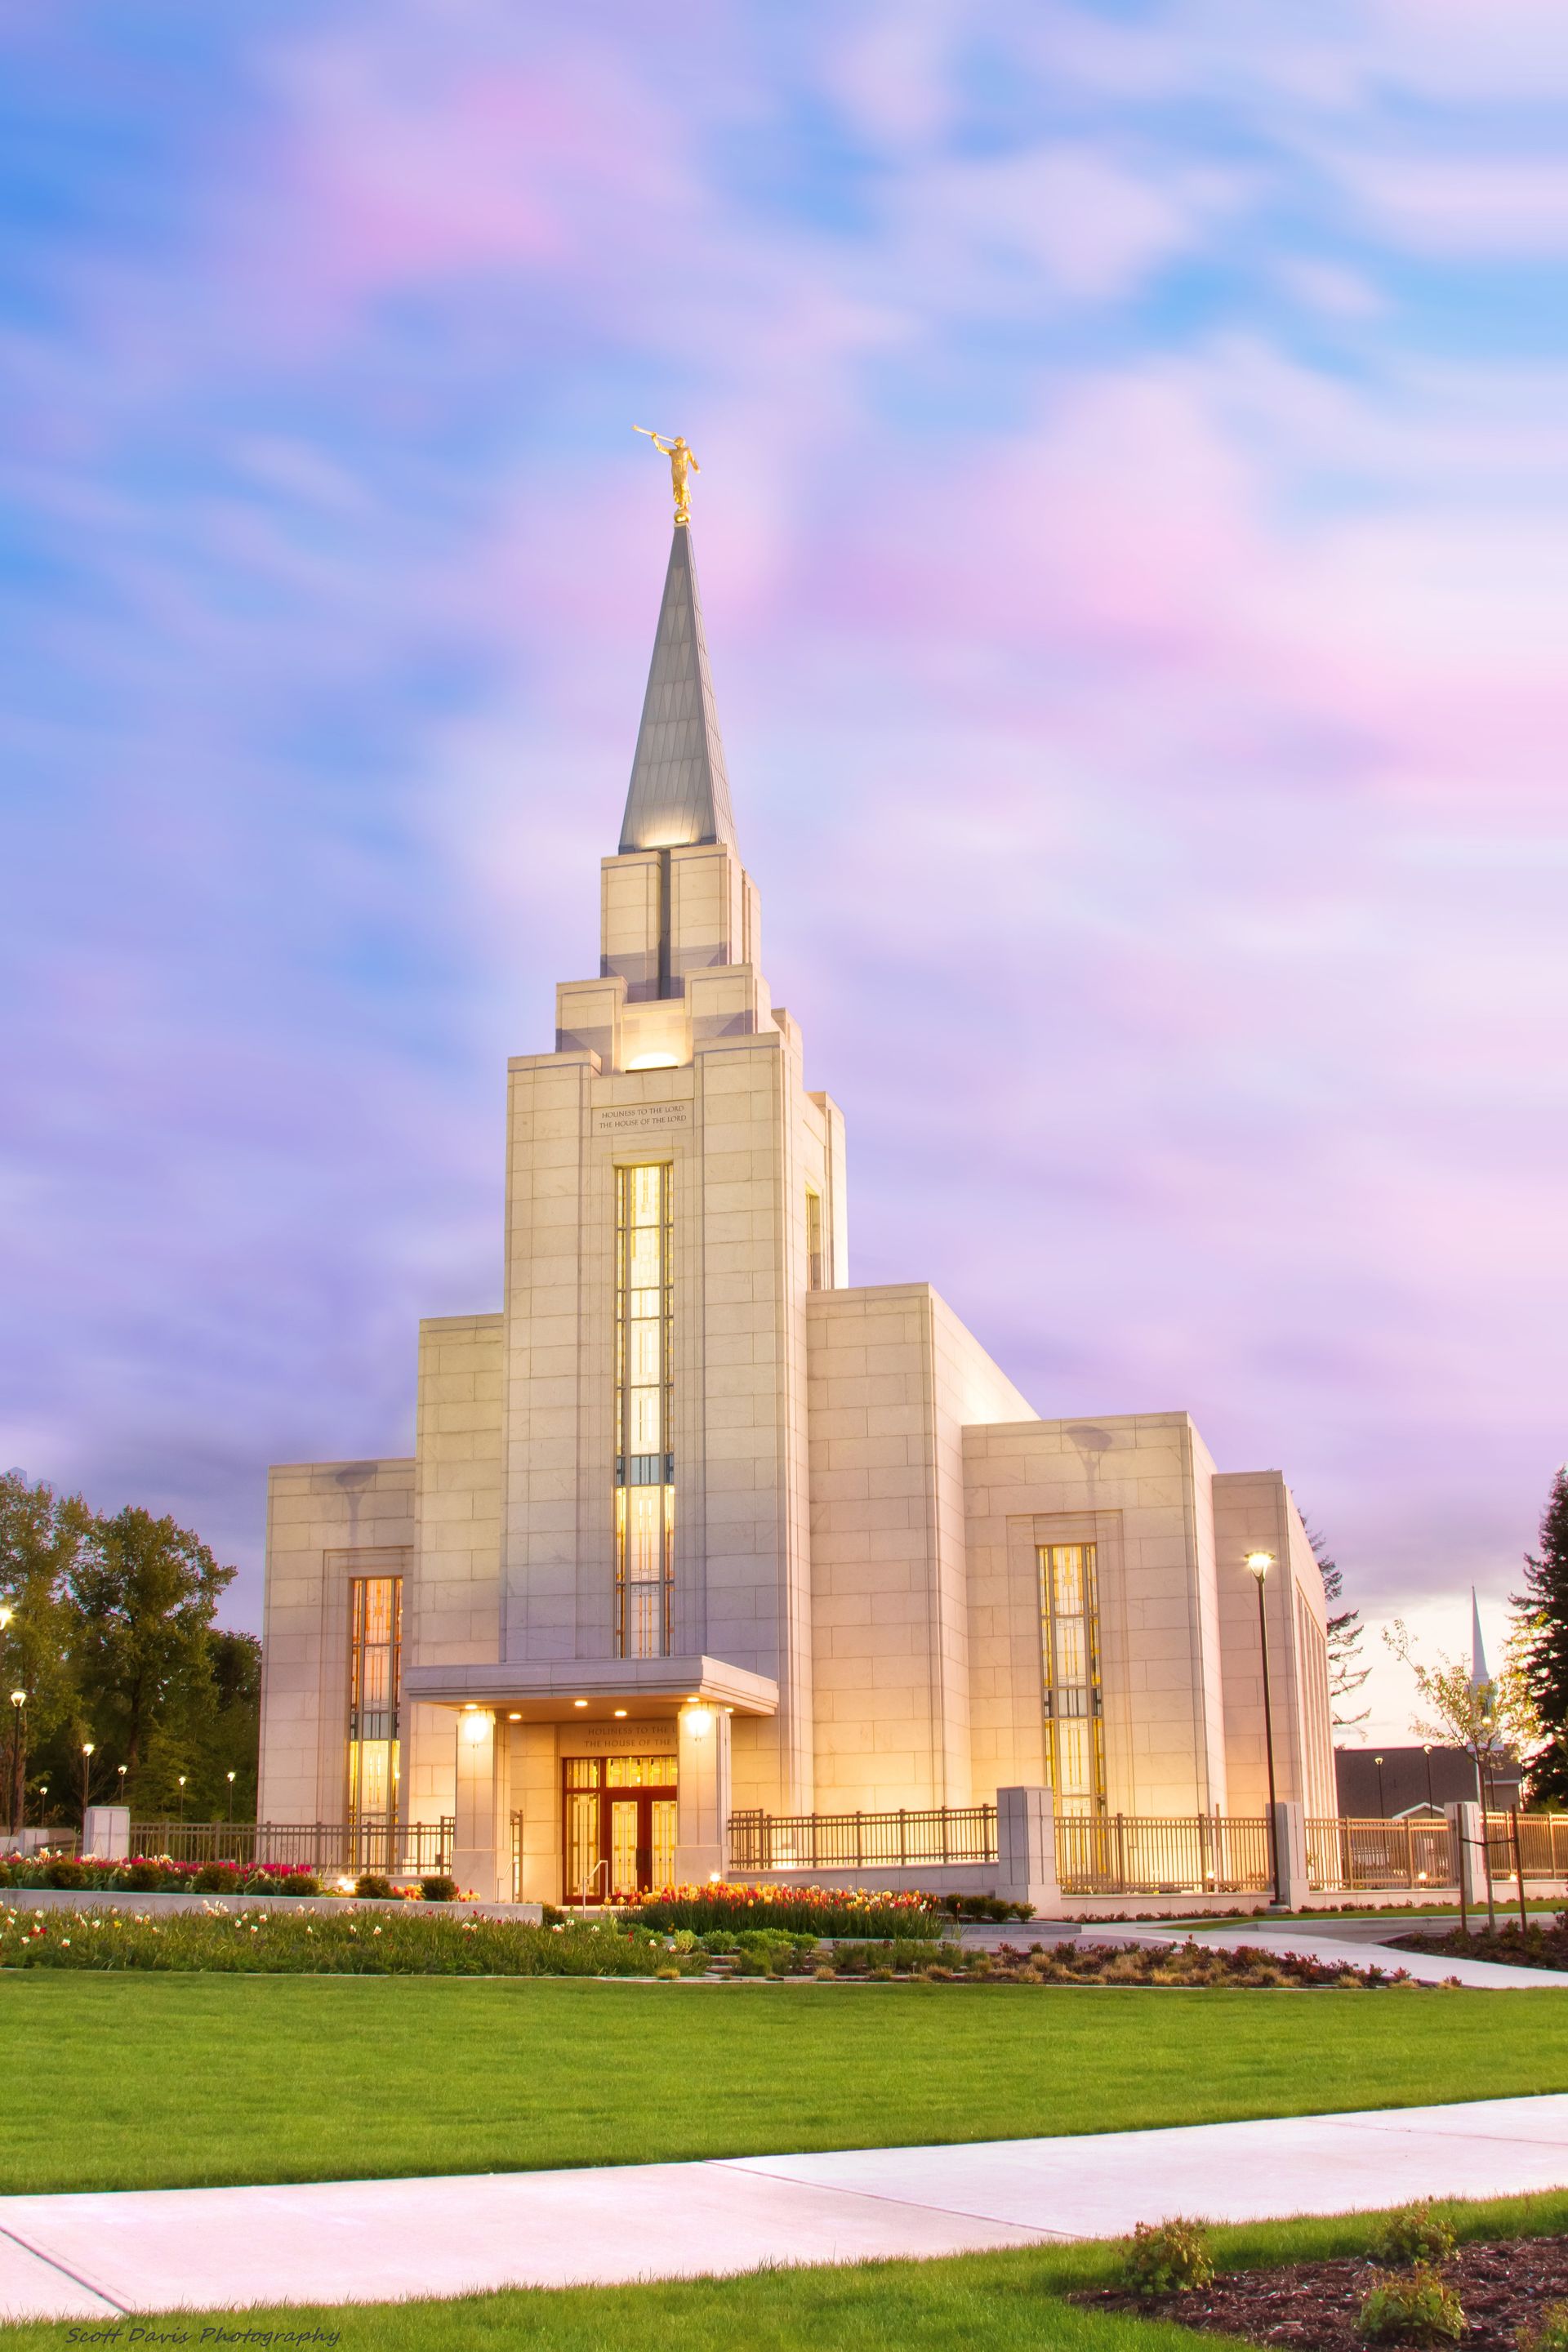 The entire Vancouver British Columbia Temple, including the entrance and scenery.